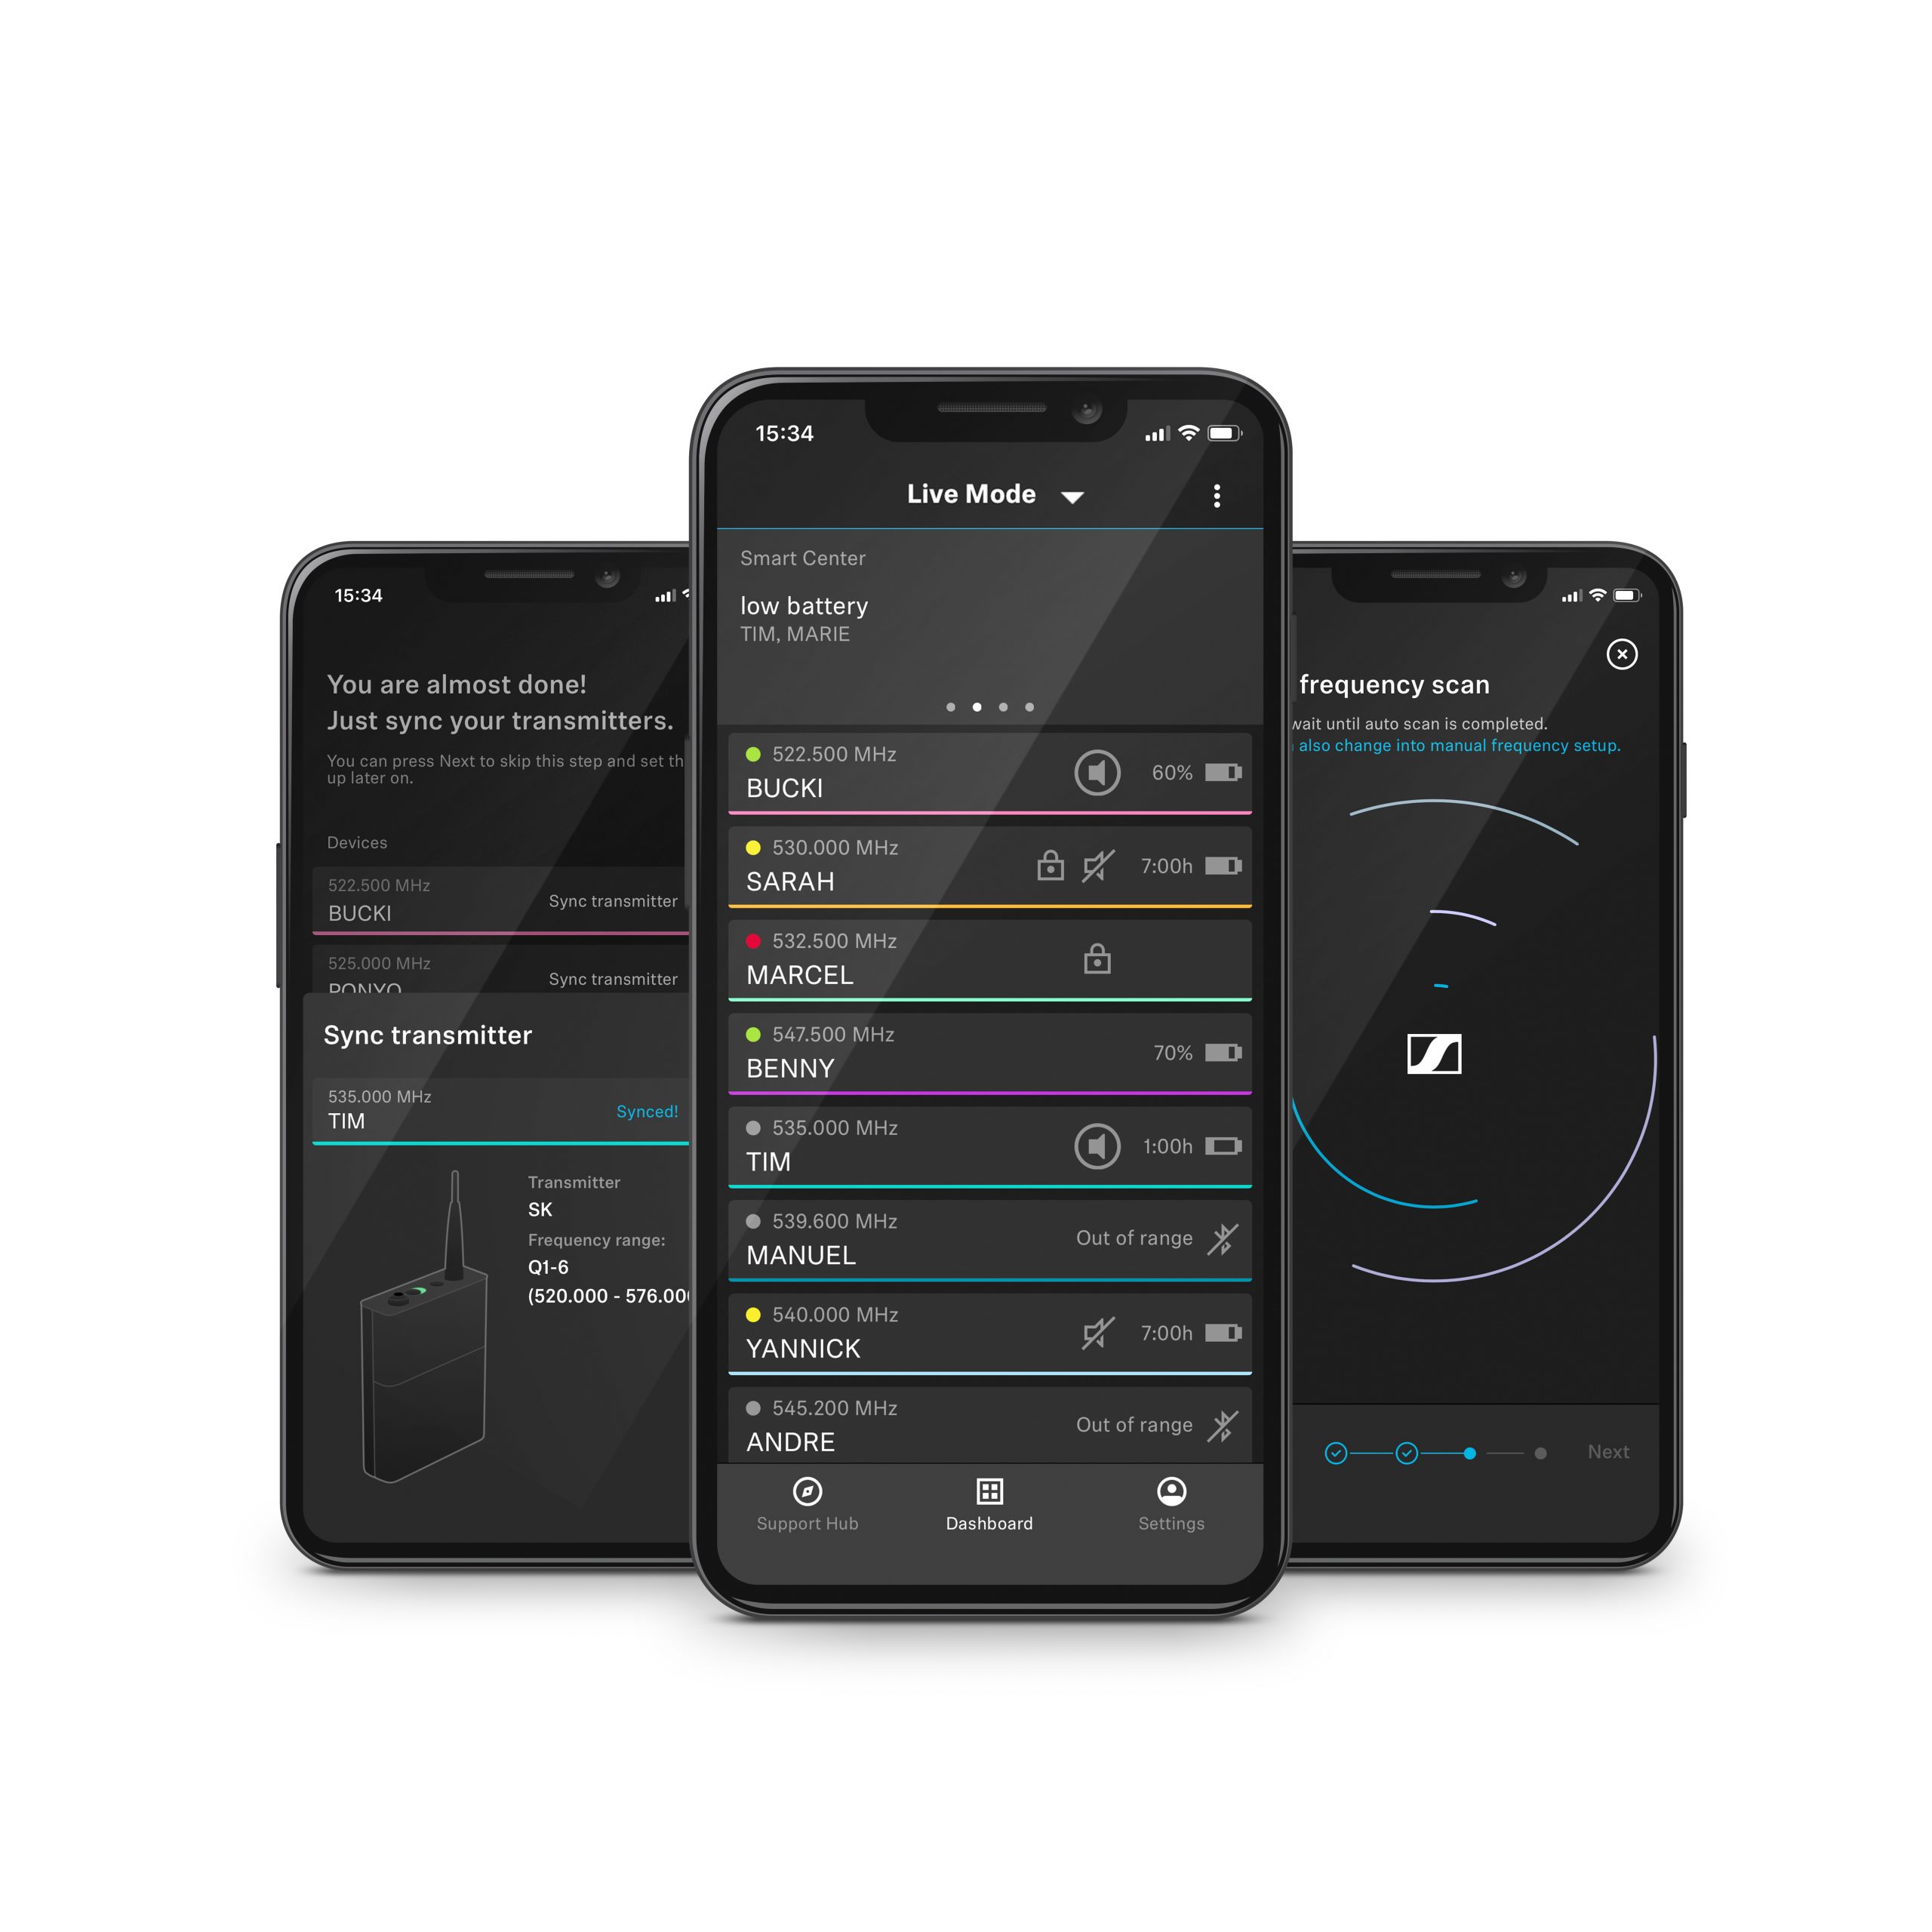 https://www.sportsvideo.org/wp-content/uploads/2021/06/Smartphone_with_Smart_Assist_App_RGB-scaled.jpg